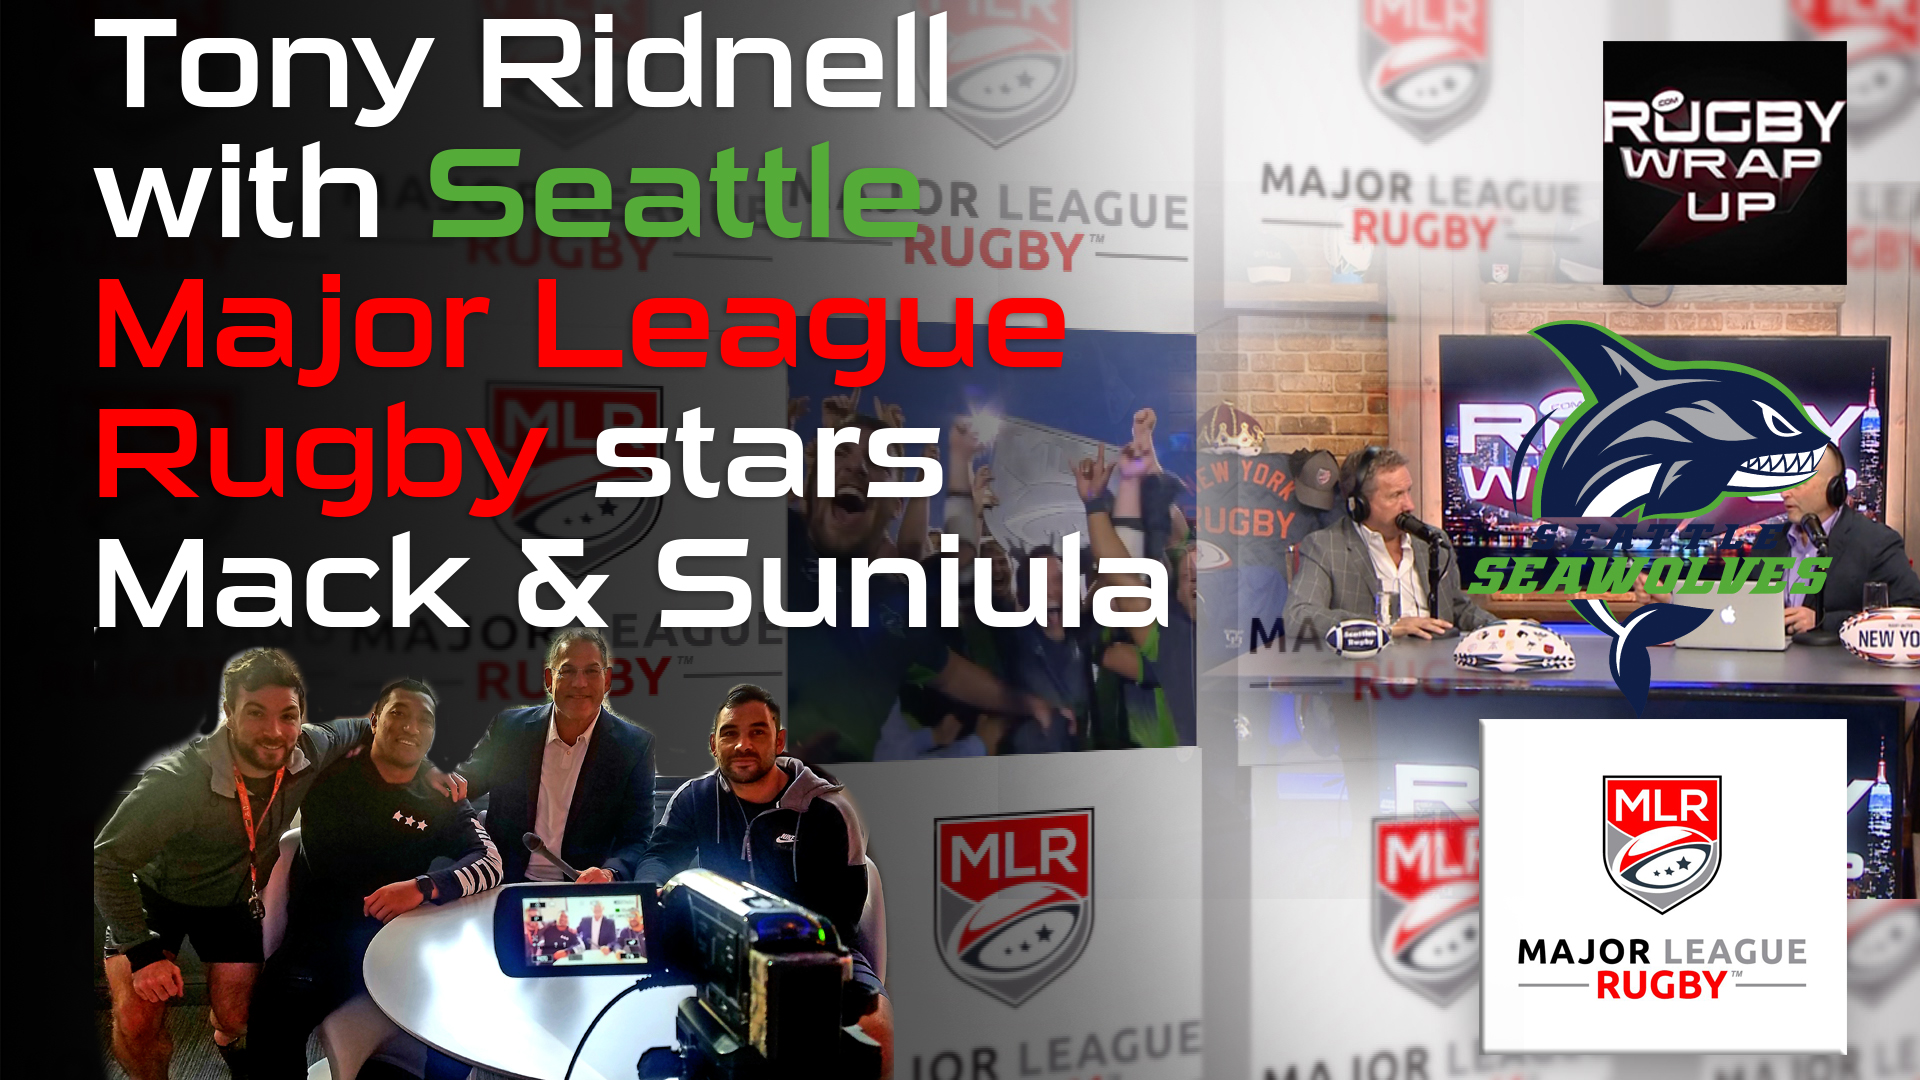 Rugby TV and Podcast: Seawolves Super Fan Tony Ridnell with Shalom Suniula & Phil Mack. Rugby_Wrap_Up